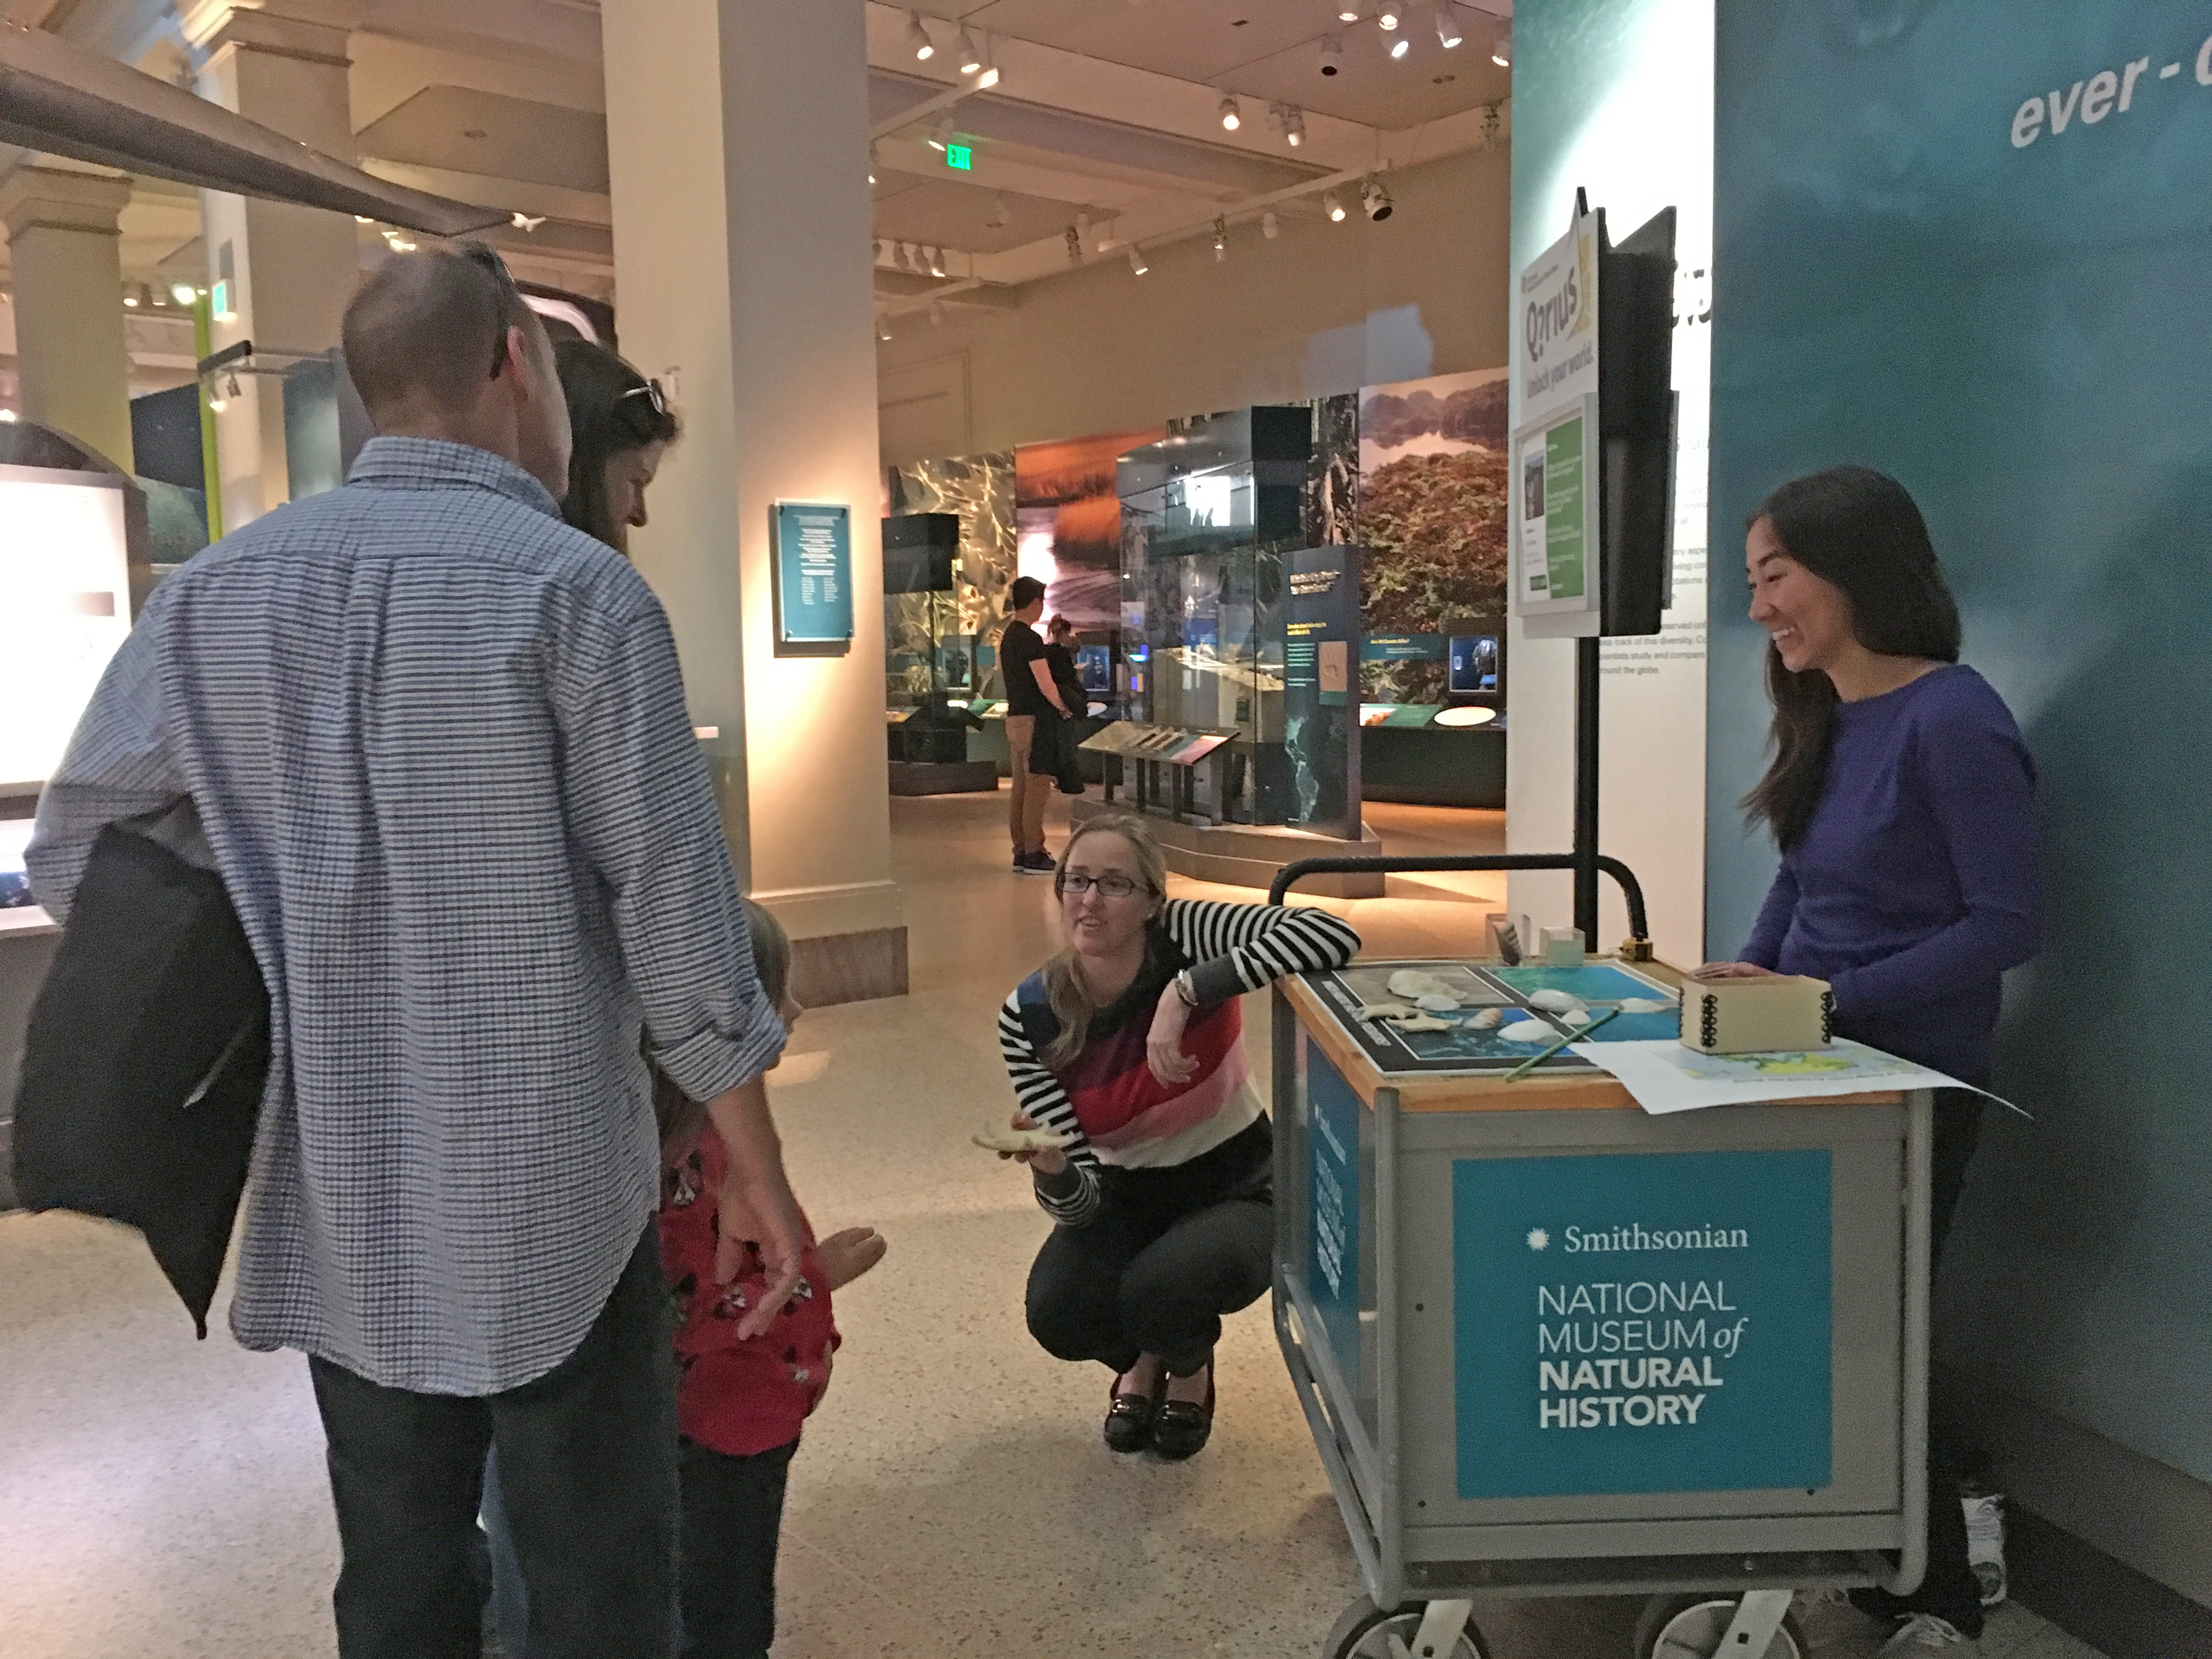 Maddie Kennedy (2017 Knauss Fellow with NOAA Sea Grant) and Christine Sur (2017 Knauss Fellow with U.S. House Committee on Natural Resources), share their knowledge on seagrasses for the Expert Is In Kiosk at the Smithsonian Museum of Natural History.